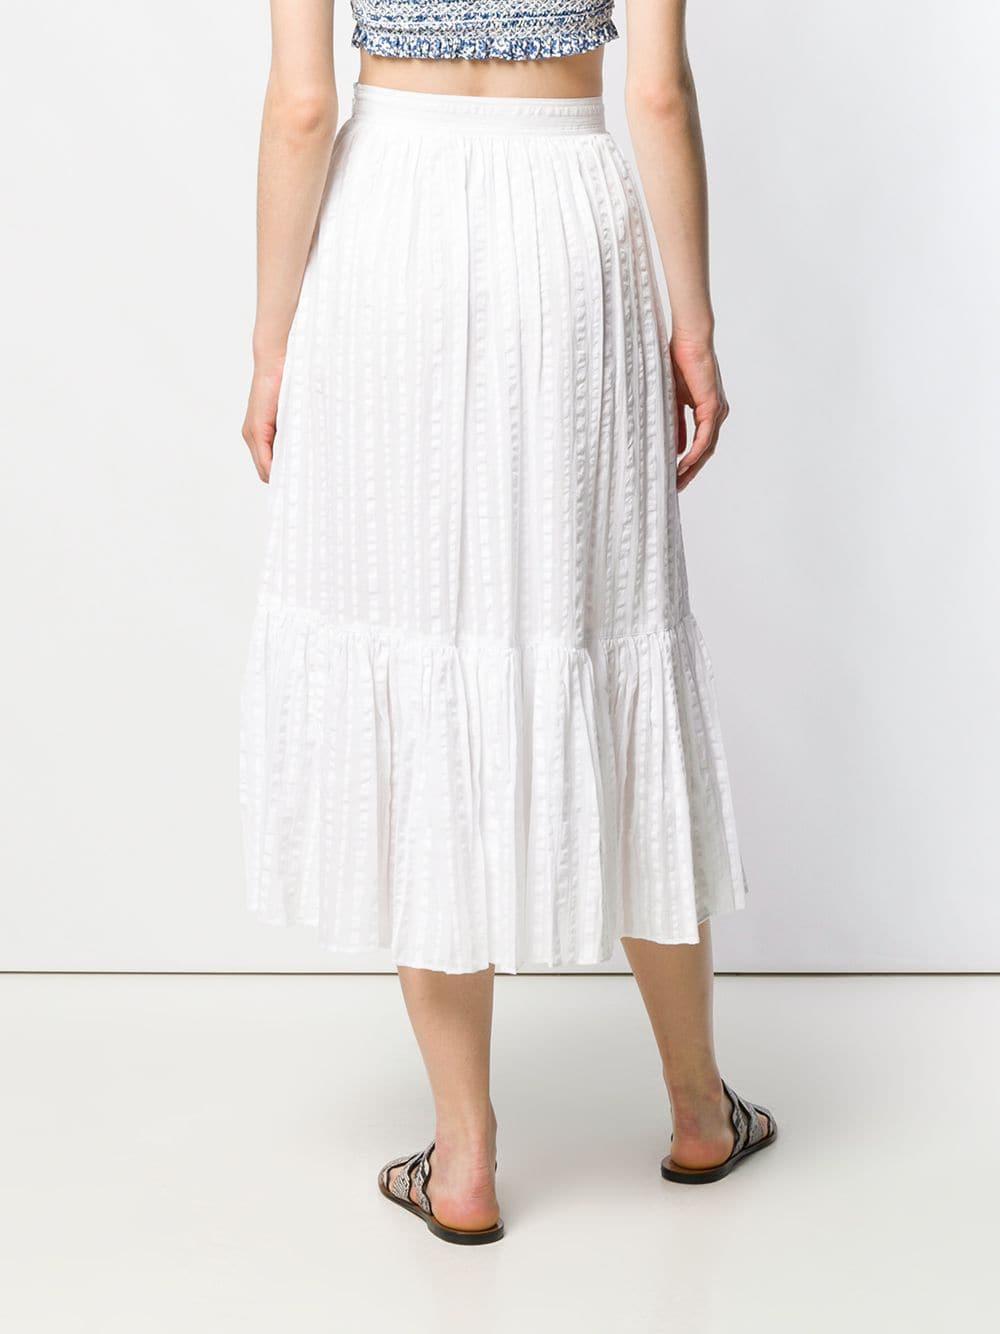 Tory Burch Cotton Tiered A-line Skirt in White - Lyst